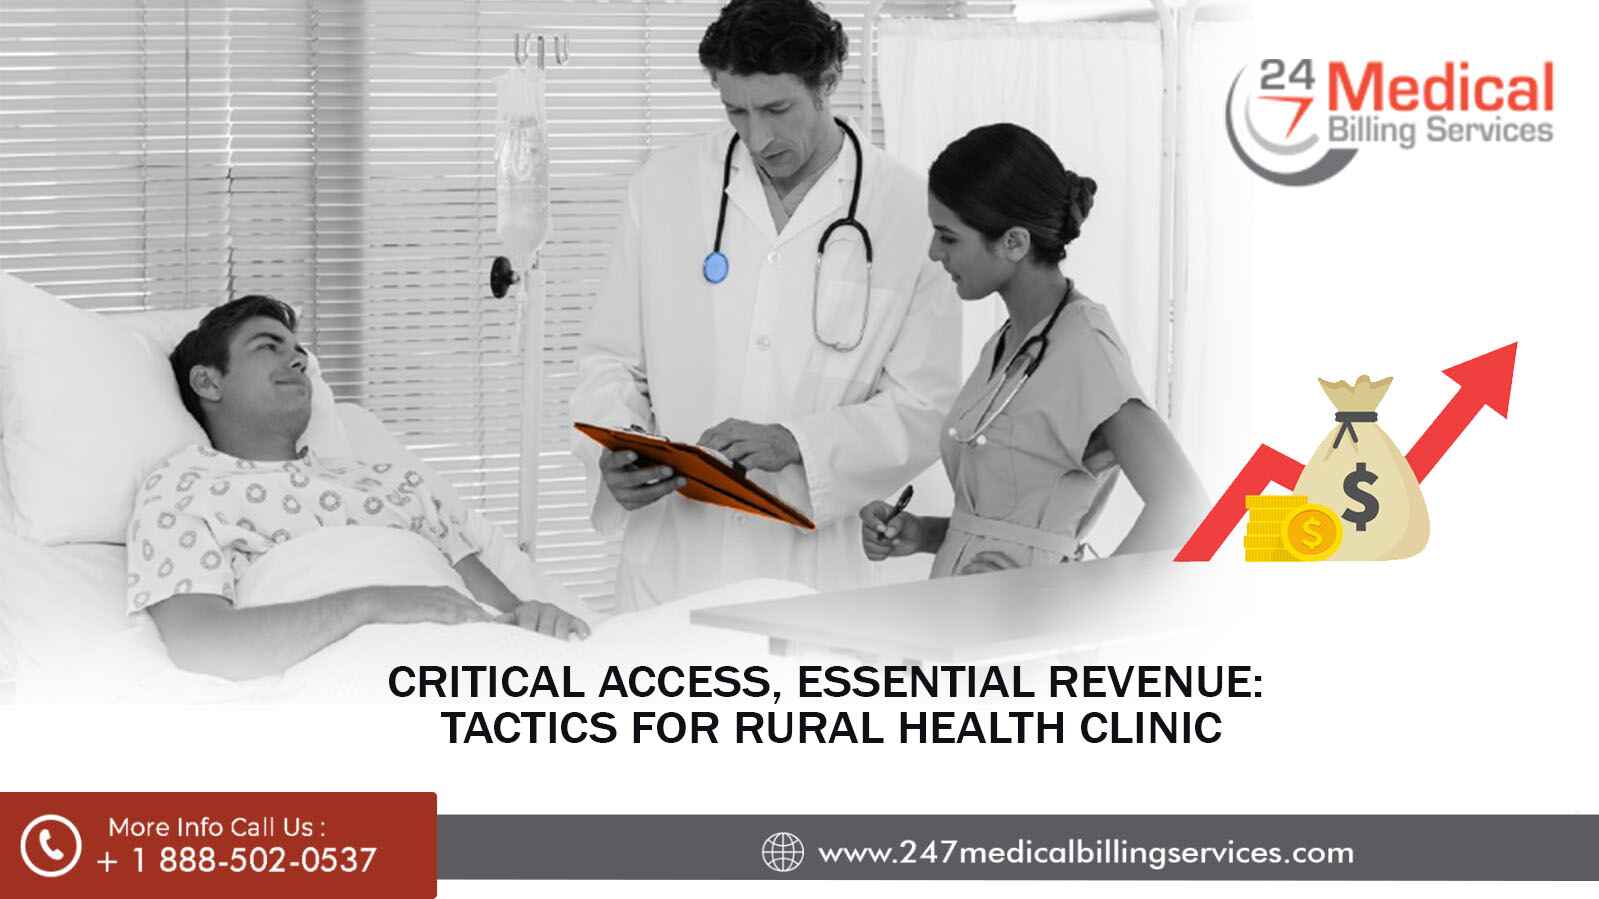 Discover tactics for rural health clinics to optimize revenue and financial stability. Partner with us for personalized RHC billing solutions